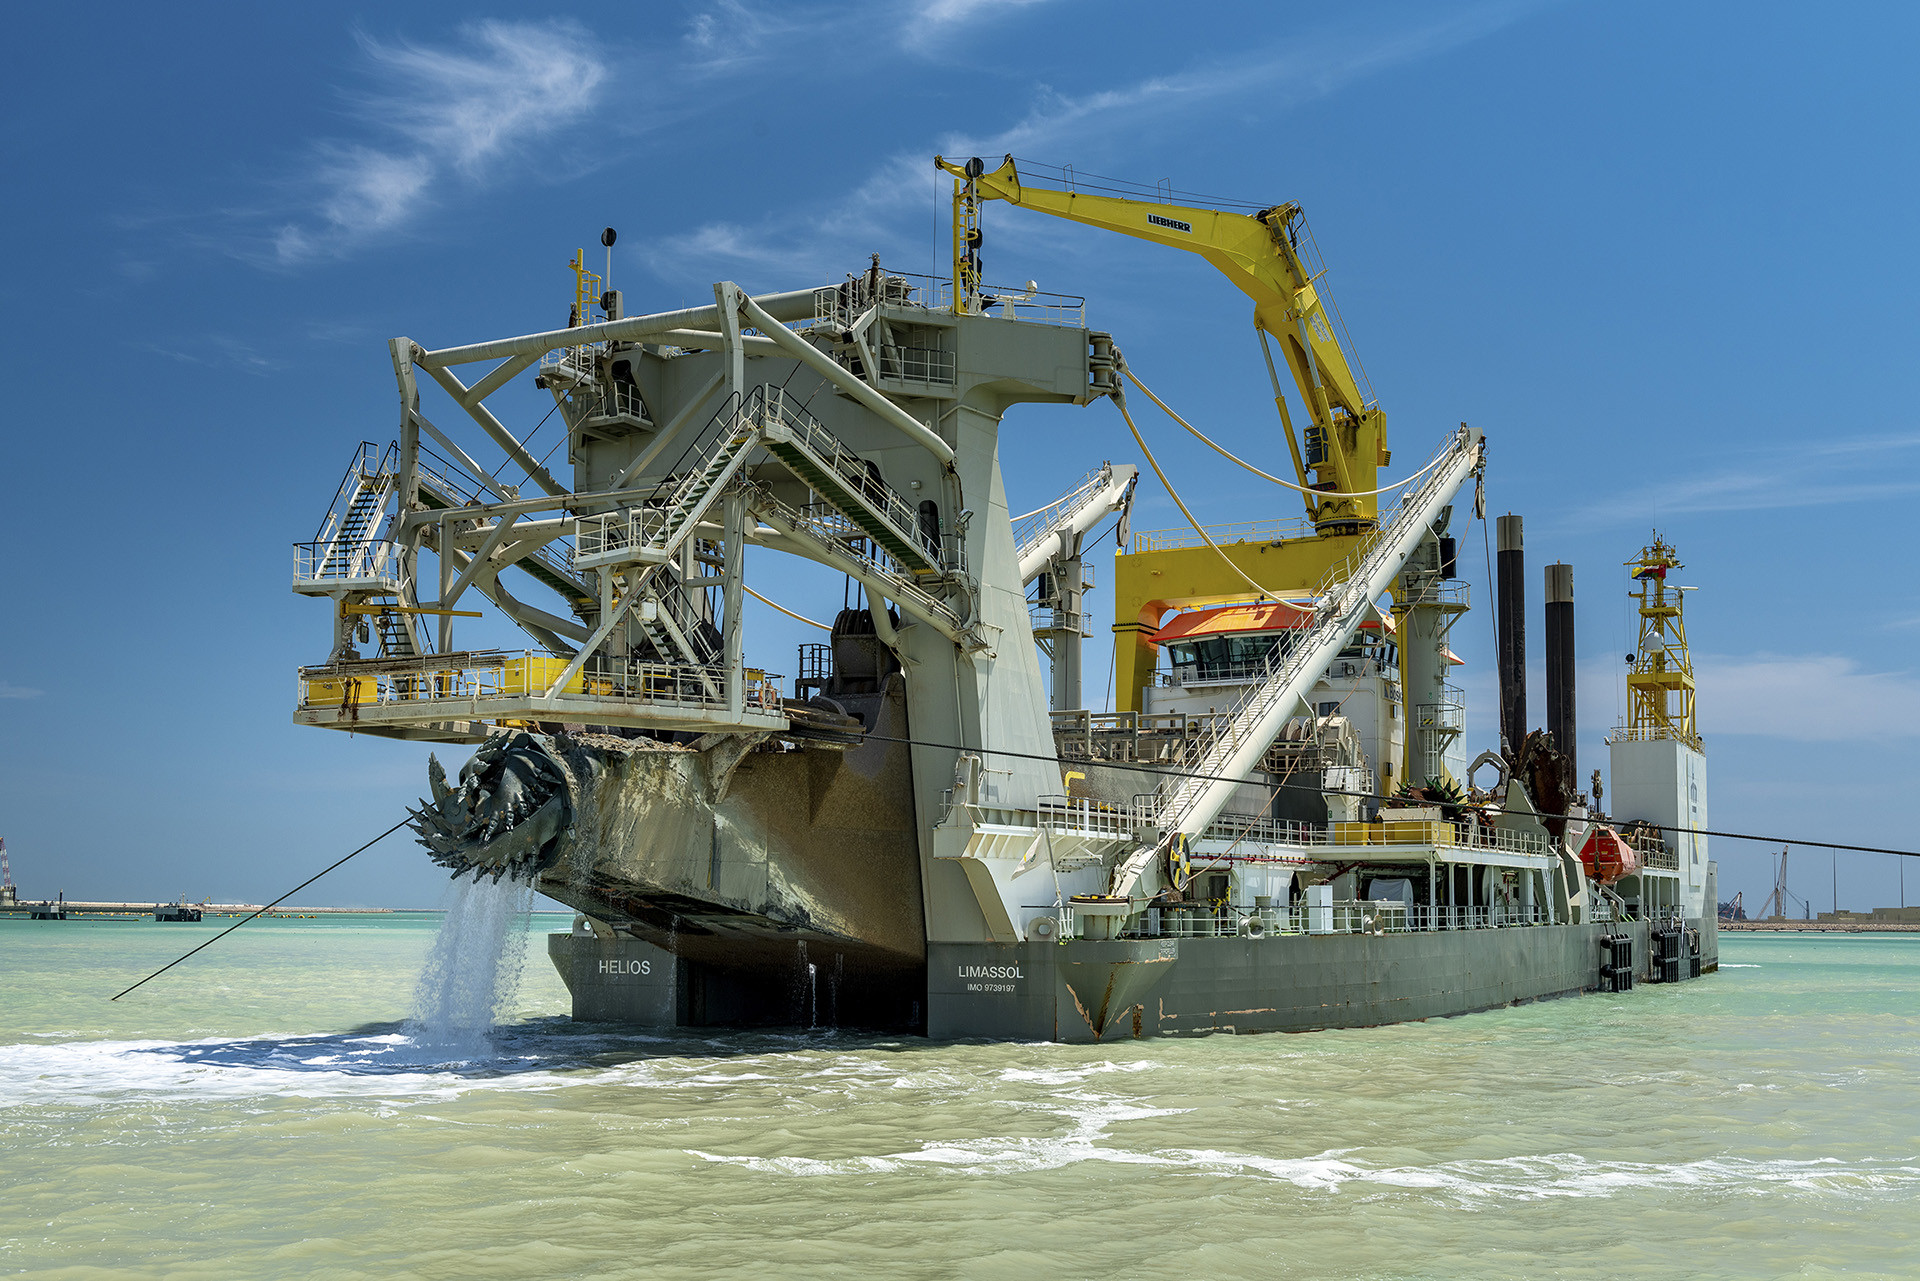 The mega-cutter Helios – one of the industry’s most powerful cutter suction dredgers